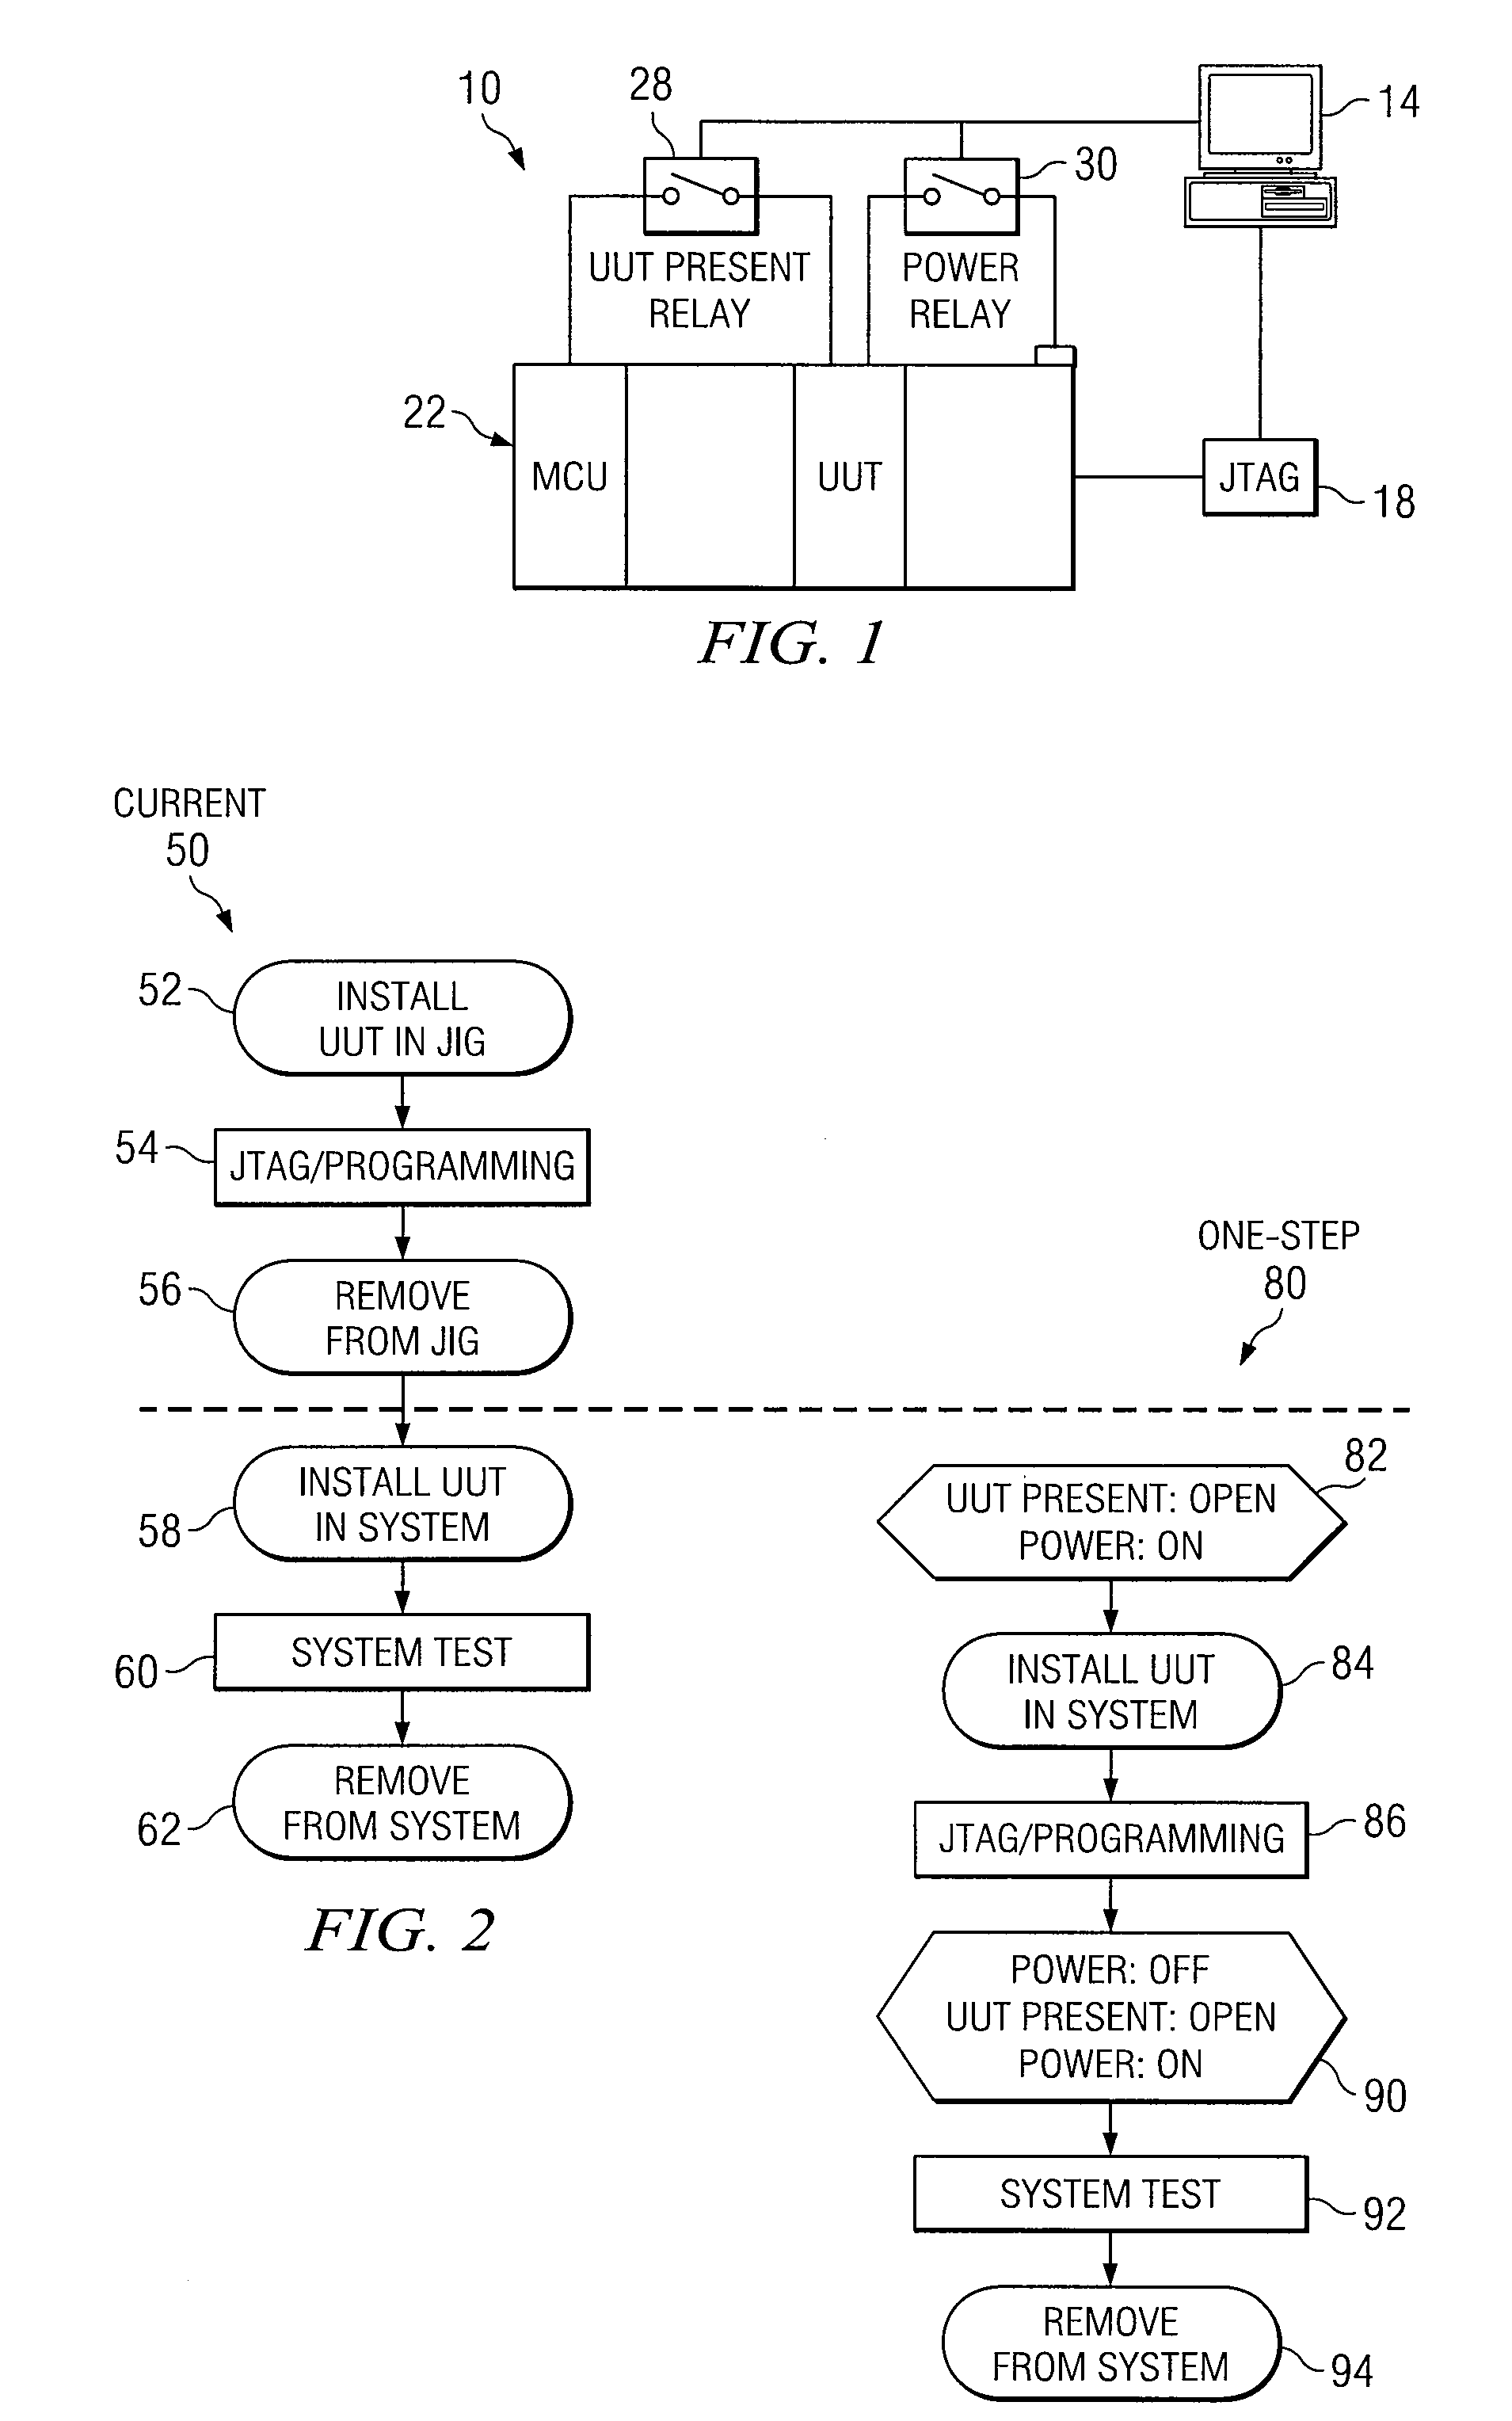 System and Method for Providing a One-Step Testing Architecture